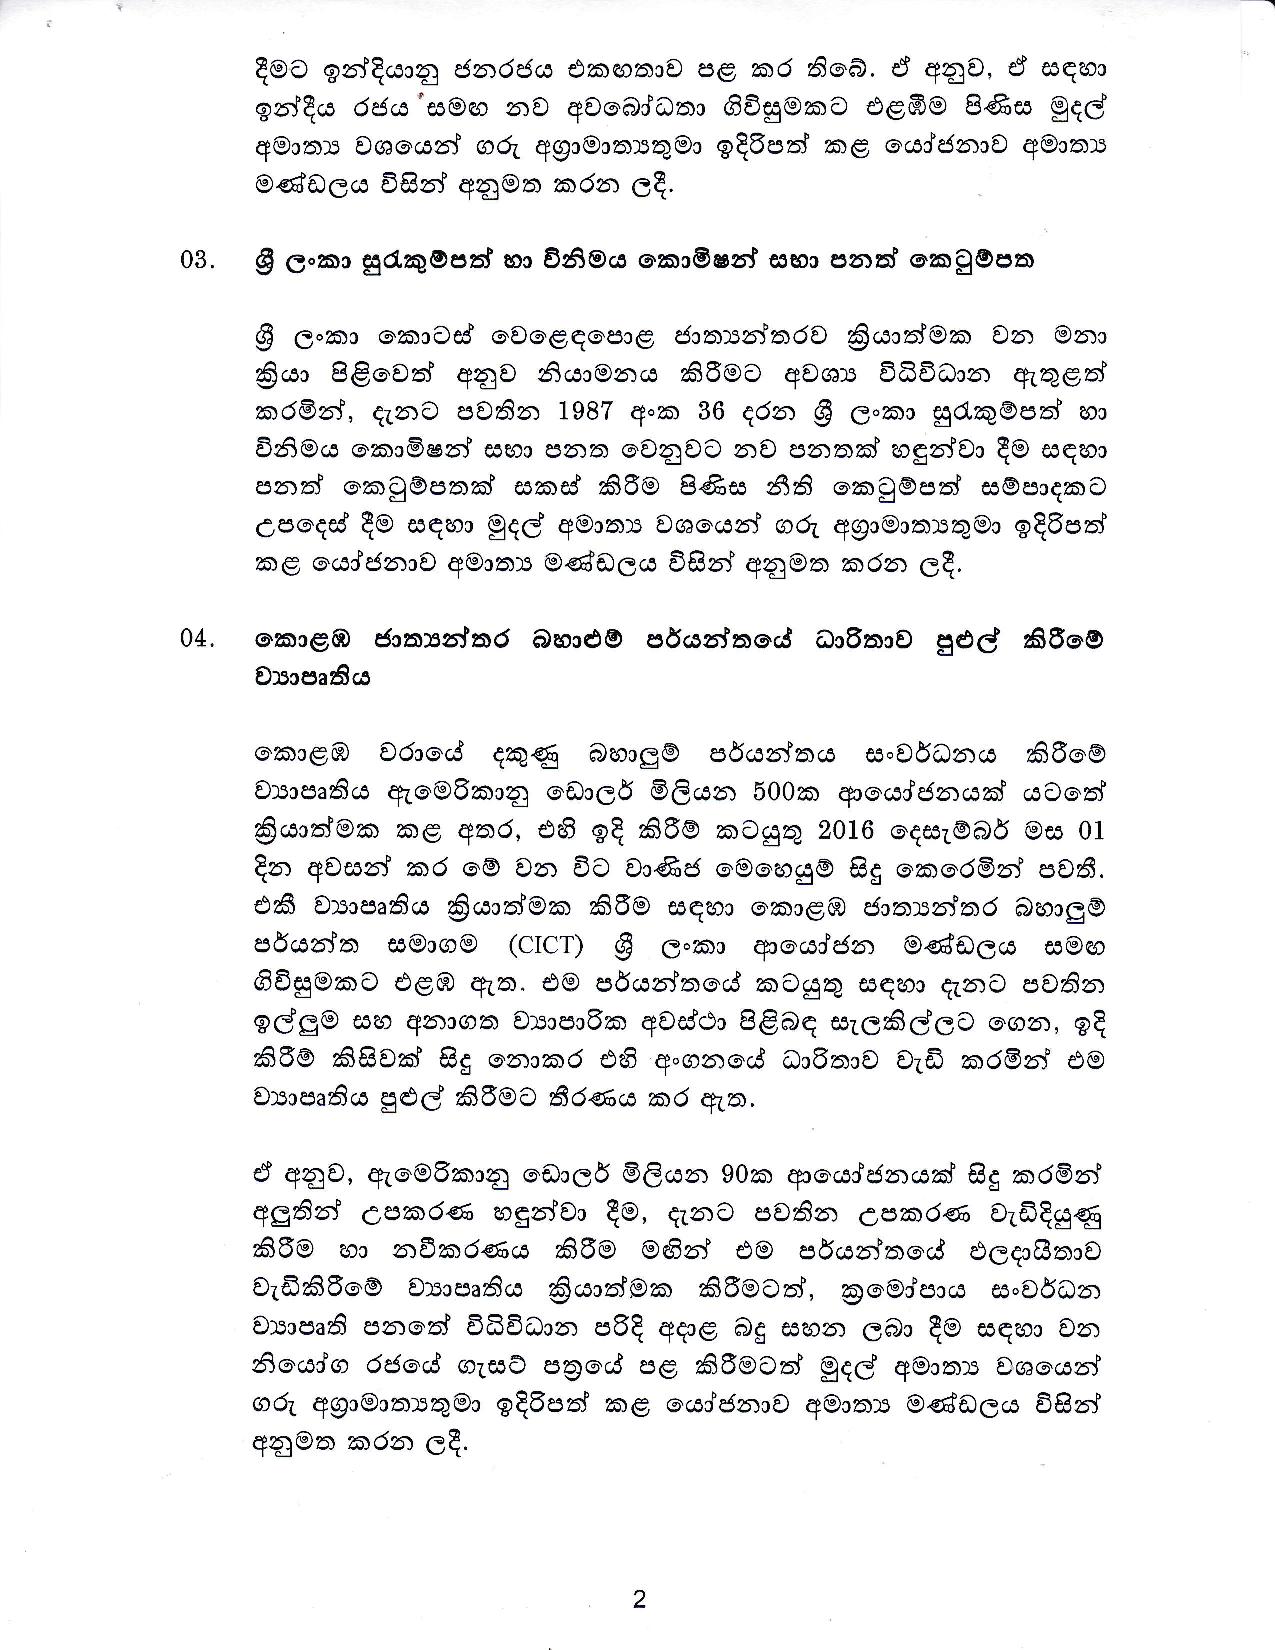 Cabinet Decision on 26.10.2020 page 002